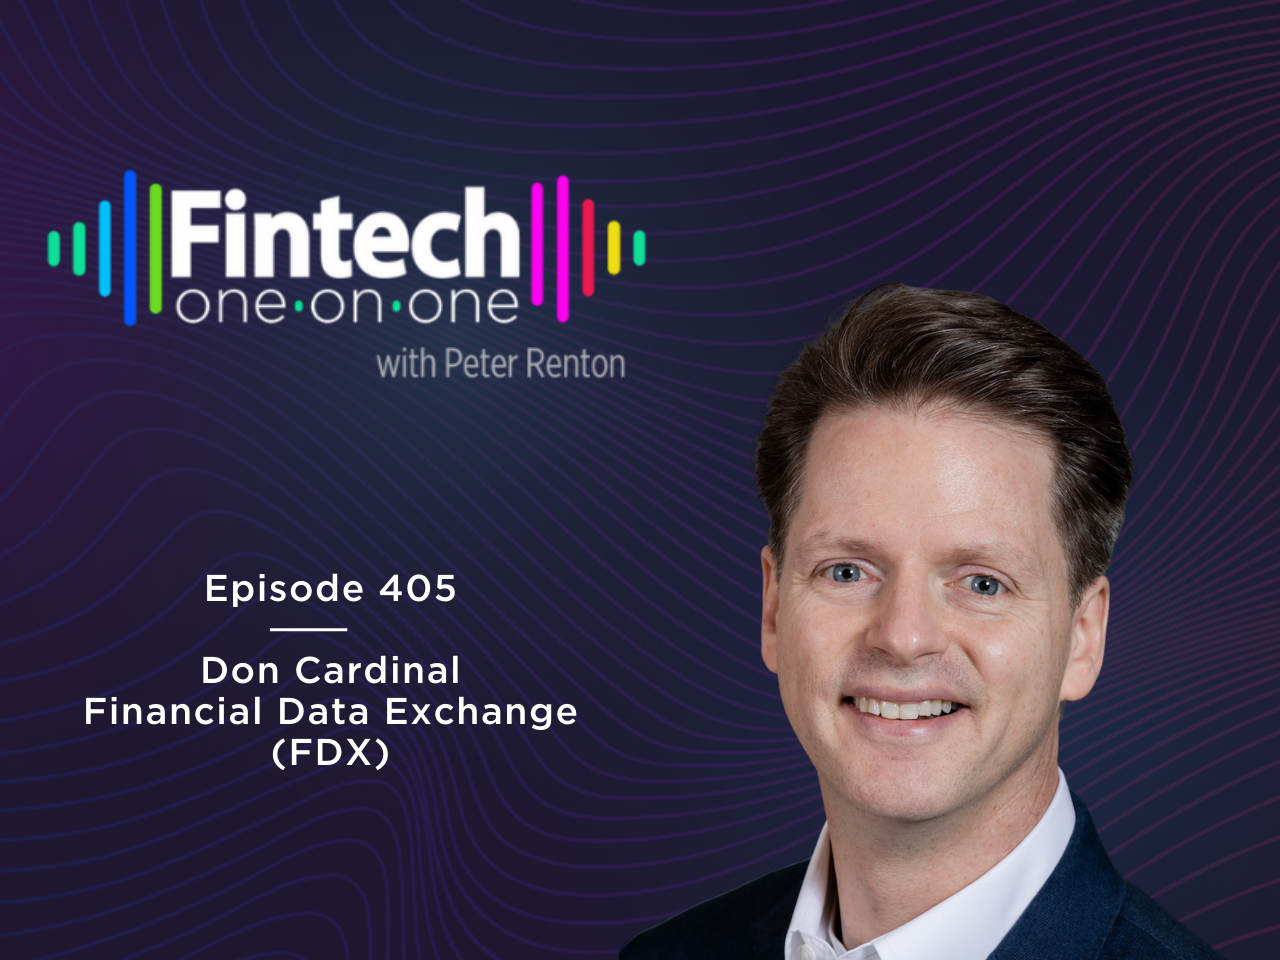 Don Cardinal, Managing Director of the Financial Data Exchange